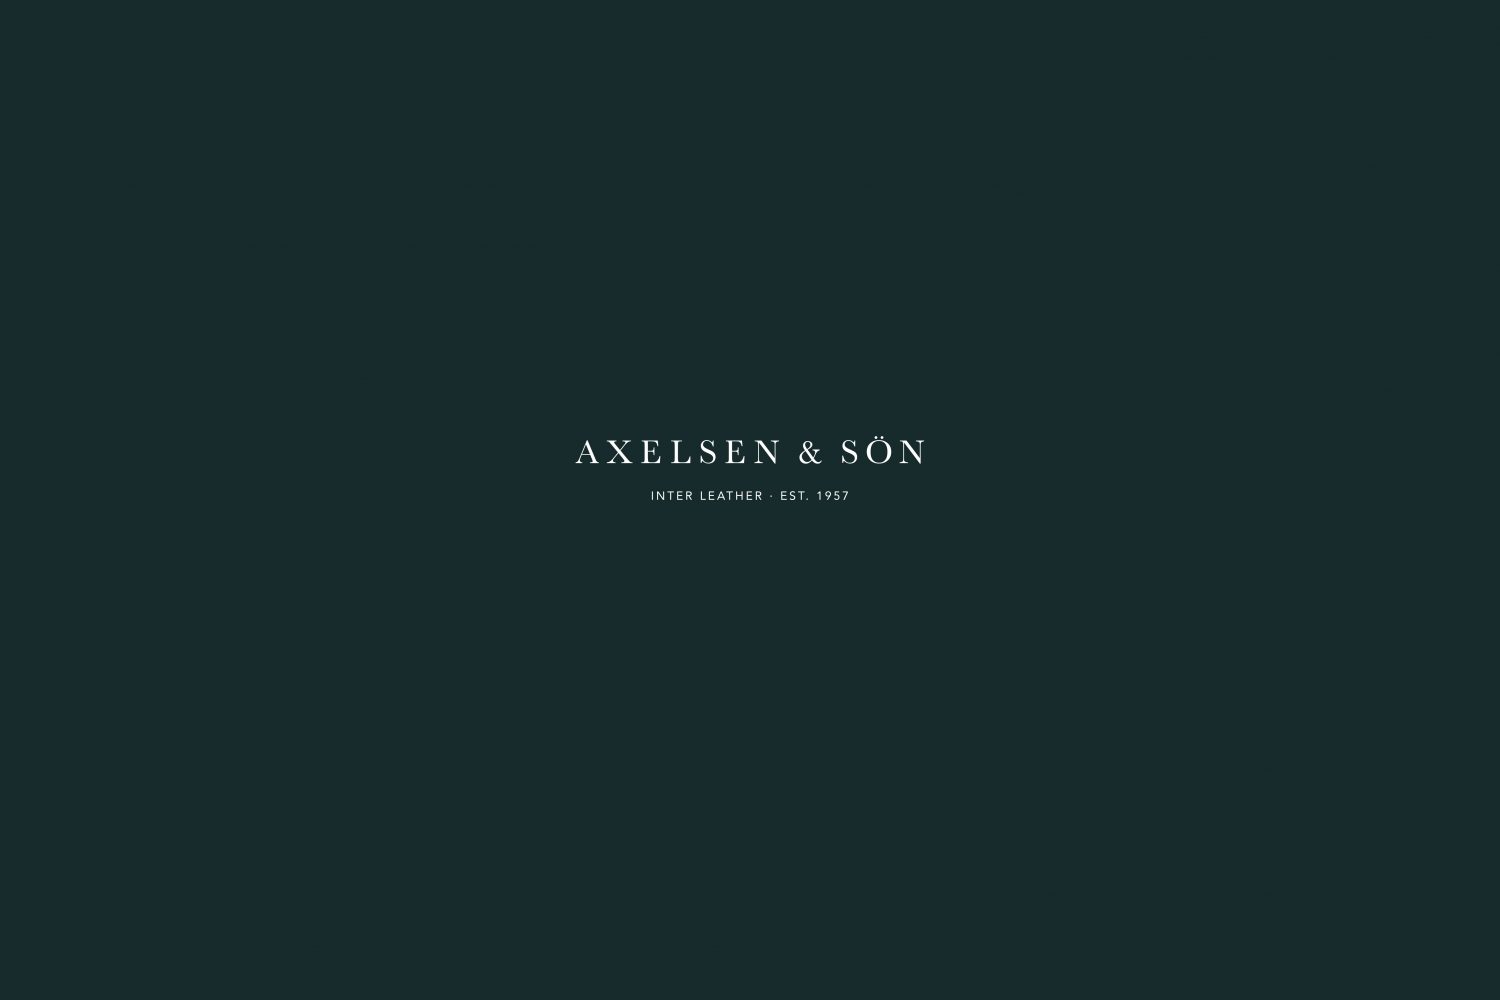 AXELSEN & SÖN - a family owned leather company, established in 1957